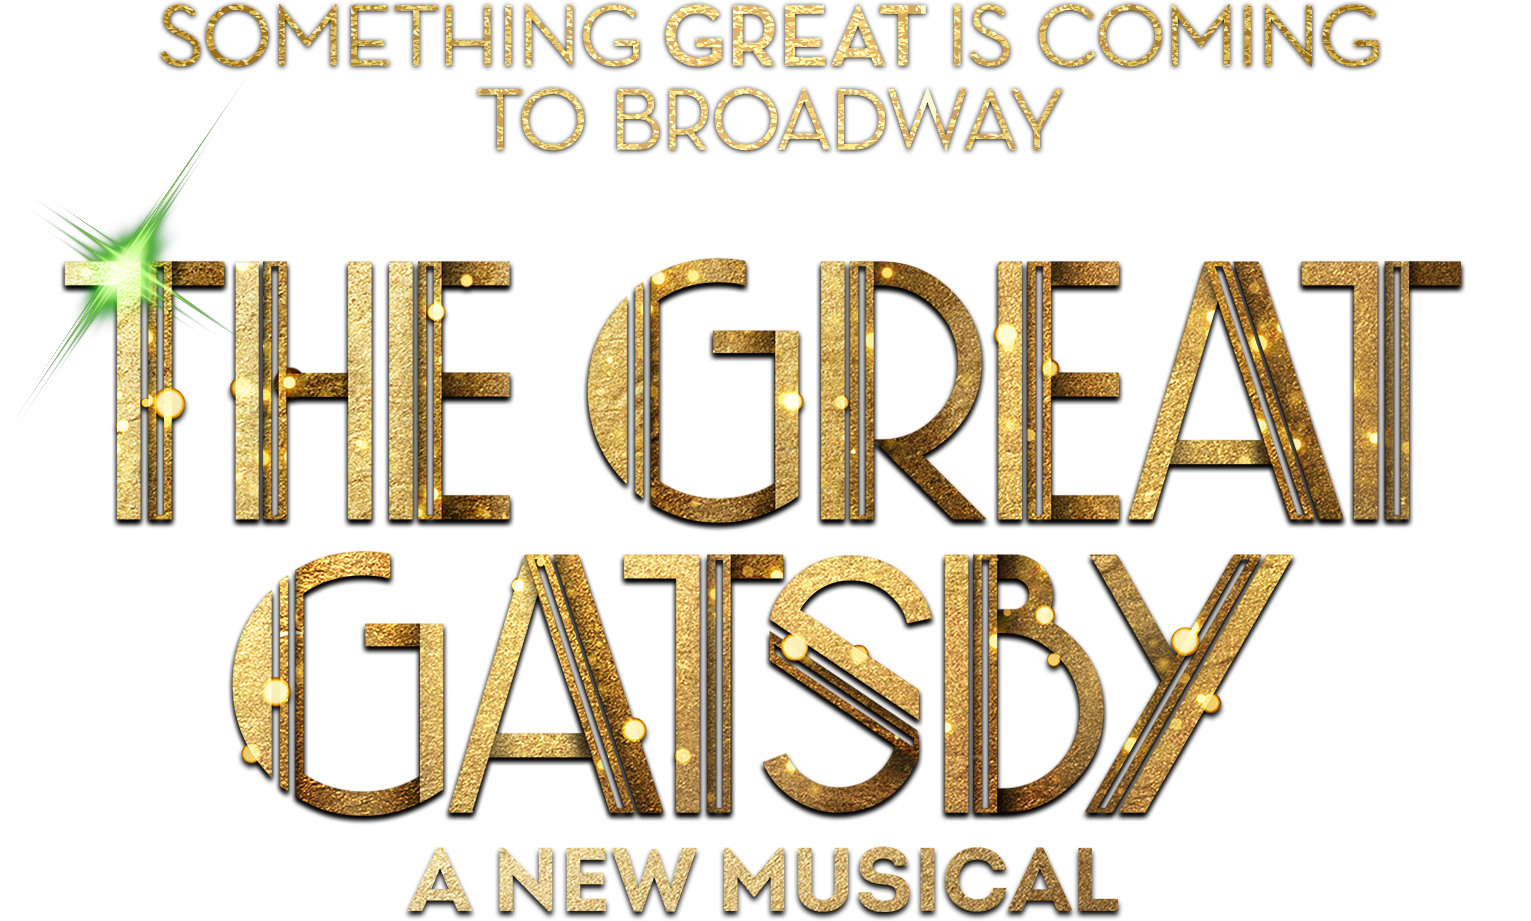 THE GREAT GATSBY  Official Broadway Site